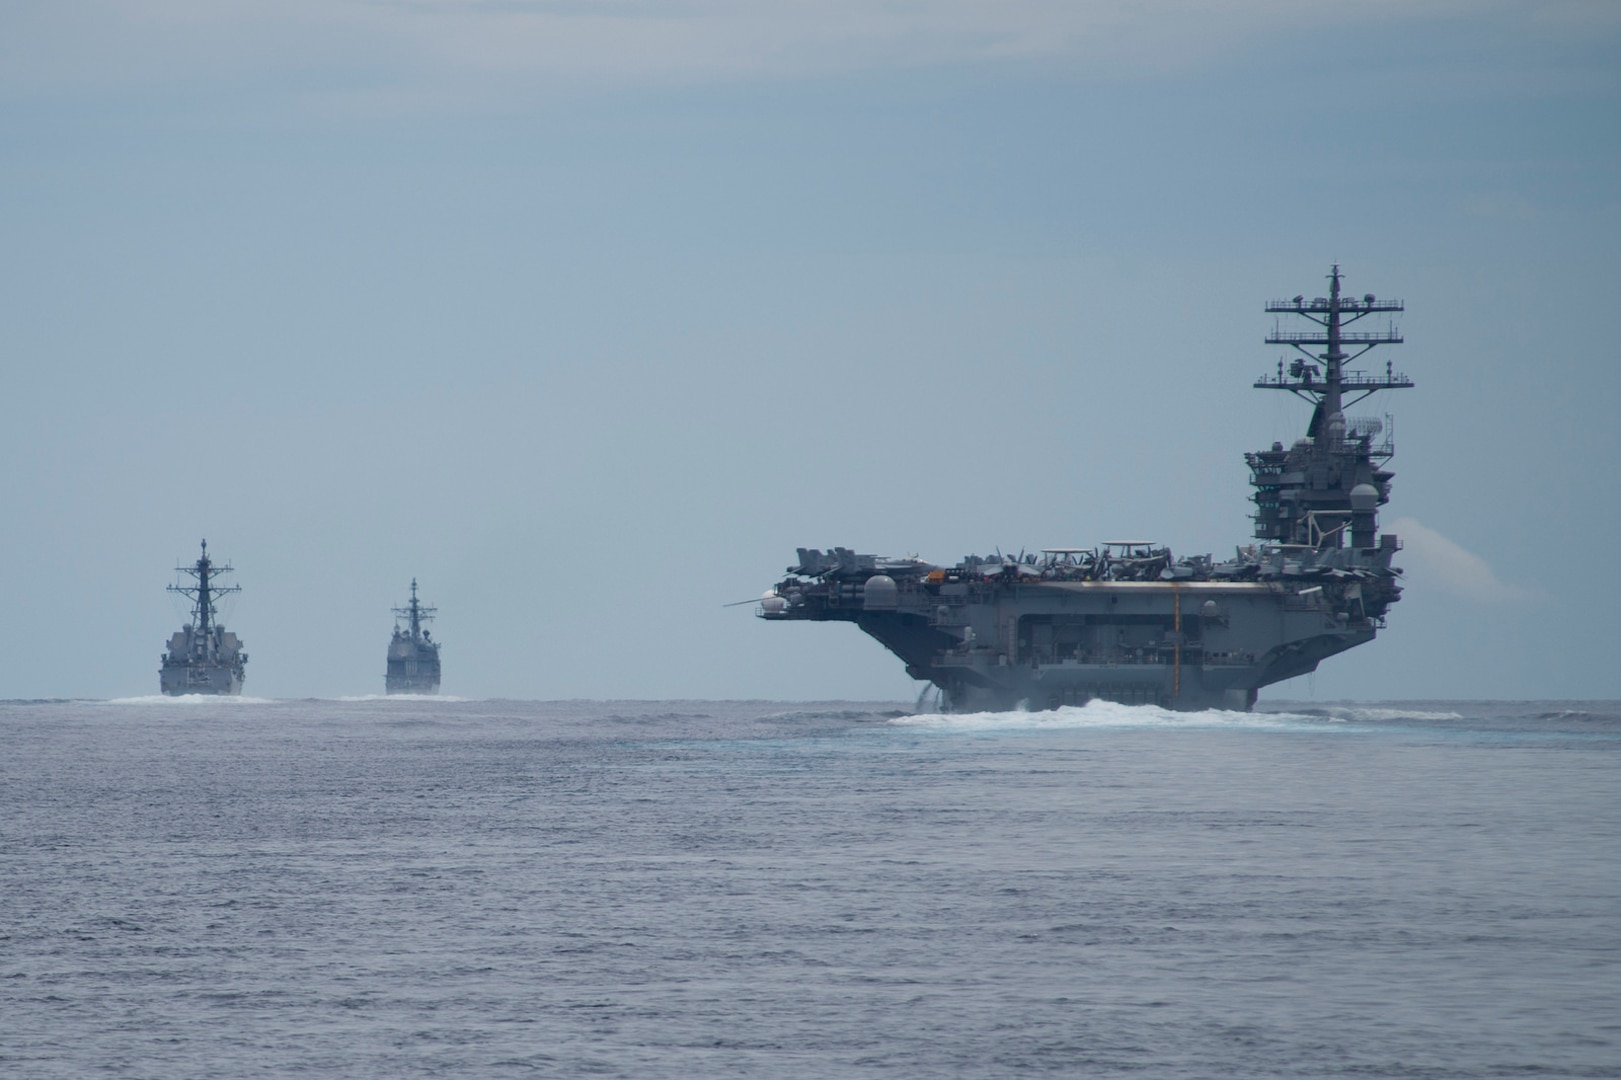 Ships assigned to the Nimitz Carrier Strike Group transit the Surigao Strait, July 3, 2017. The Nimitz Carrier Strike Group is currently deployed in the 7th fleet area of operations. The U.S. Navy has patrolled the Indo-Asia-Pacific routinely for more than 70 years promoting regional peace and security. 